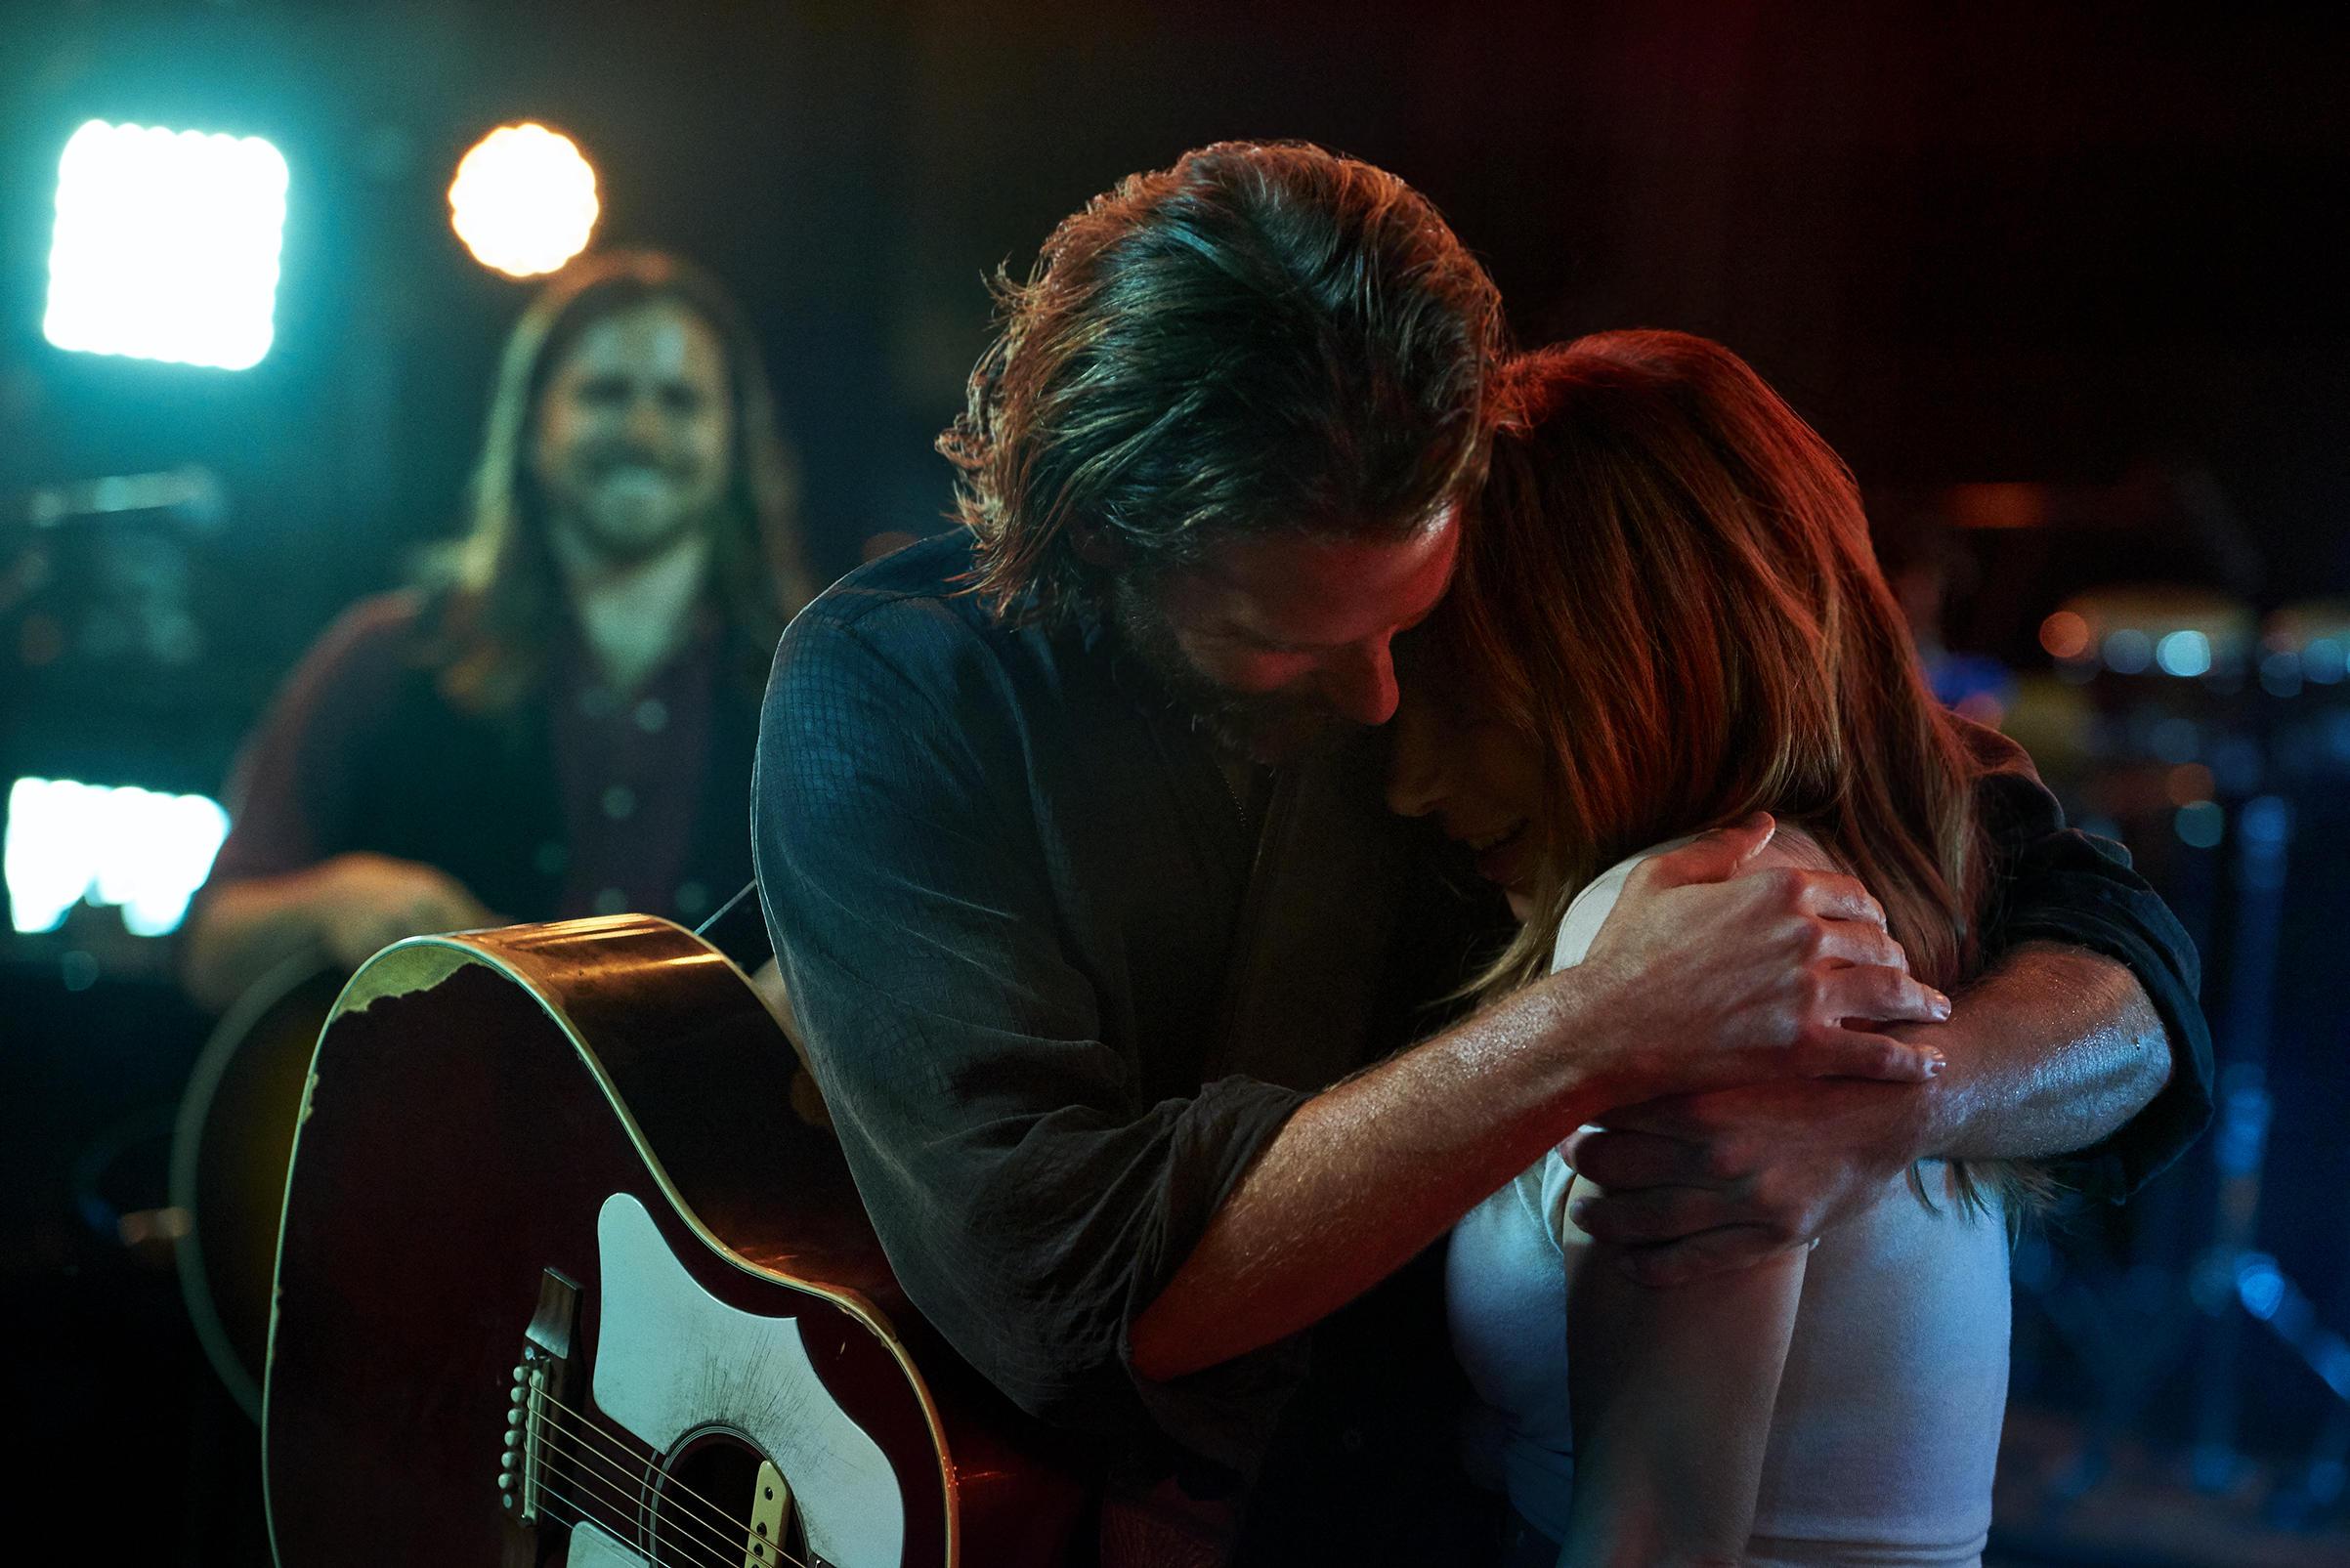 Bradley Cooper and Lady Gaga as Jackson Maine and Ally in "A Star is Born". (Peter Lindbergh — Warner Brothers)